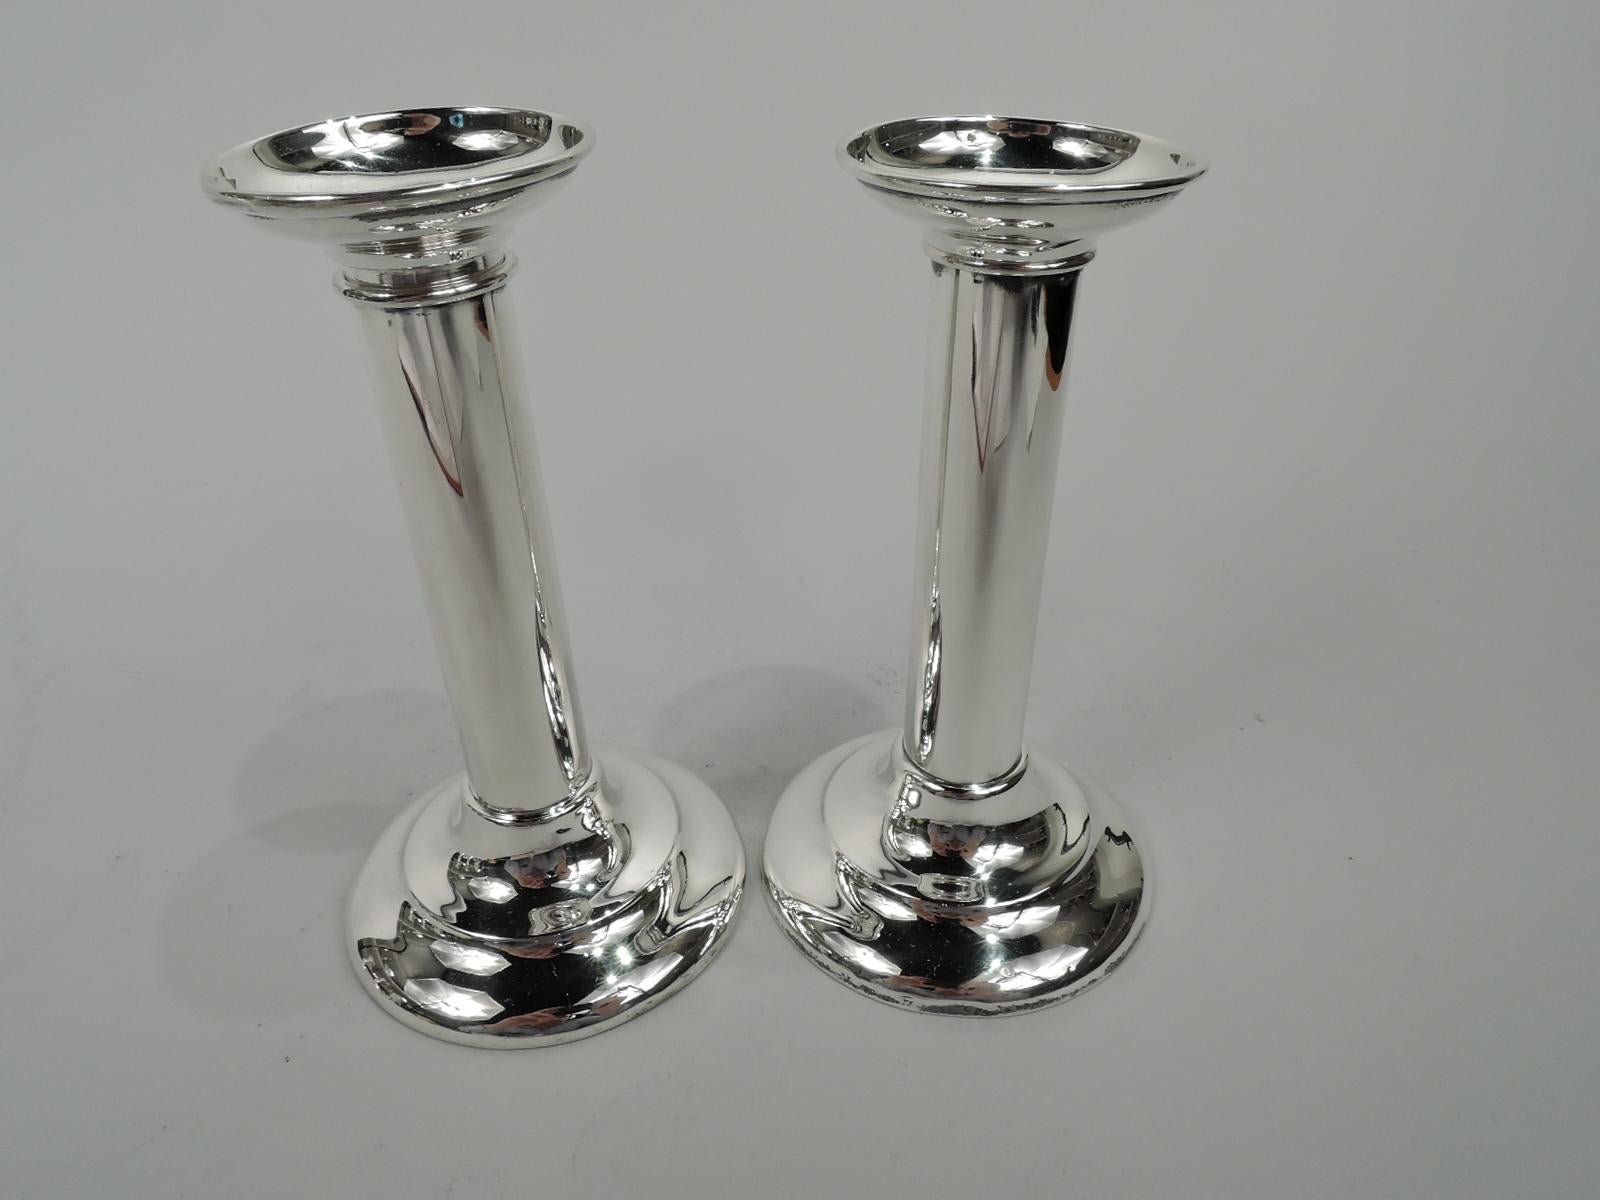 Pair of Edwardian classical sterling silver candlesticks. Made by Reed & Barton in Taunton, Mass., ca 1910. Each: Columnar shaft on stepped and domed foot. Detachable bobeche with flared rim. Ribbon-tied wreath (vacant) engraved on shaft. Fully